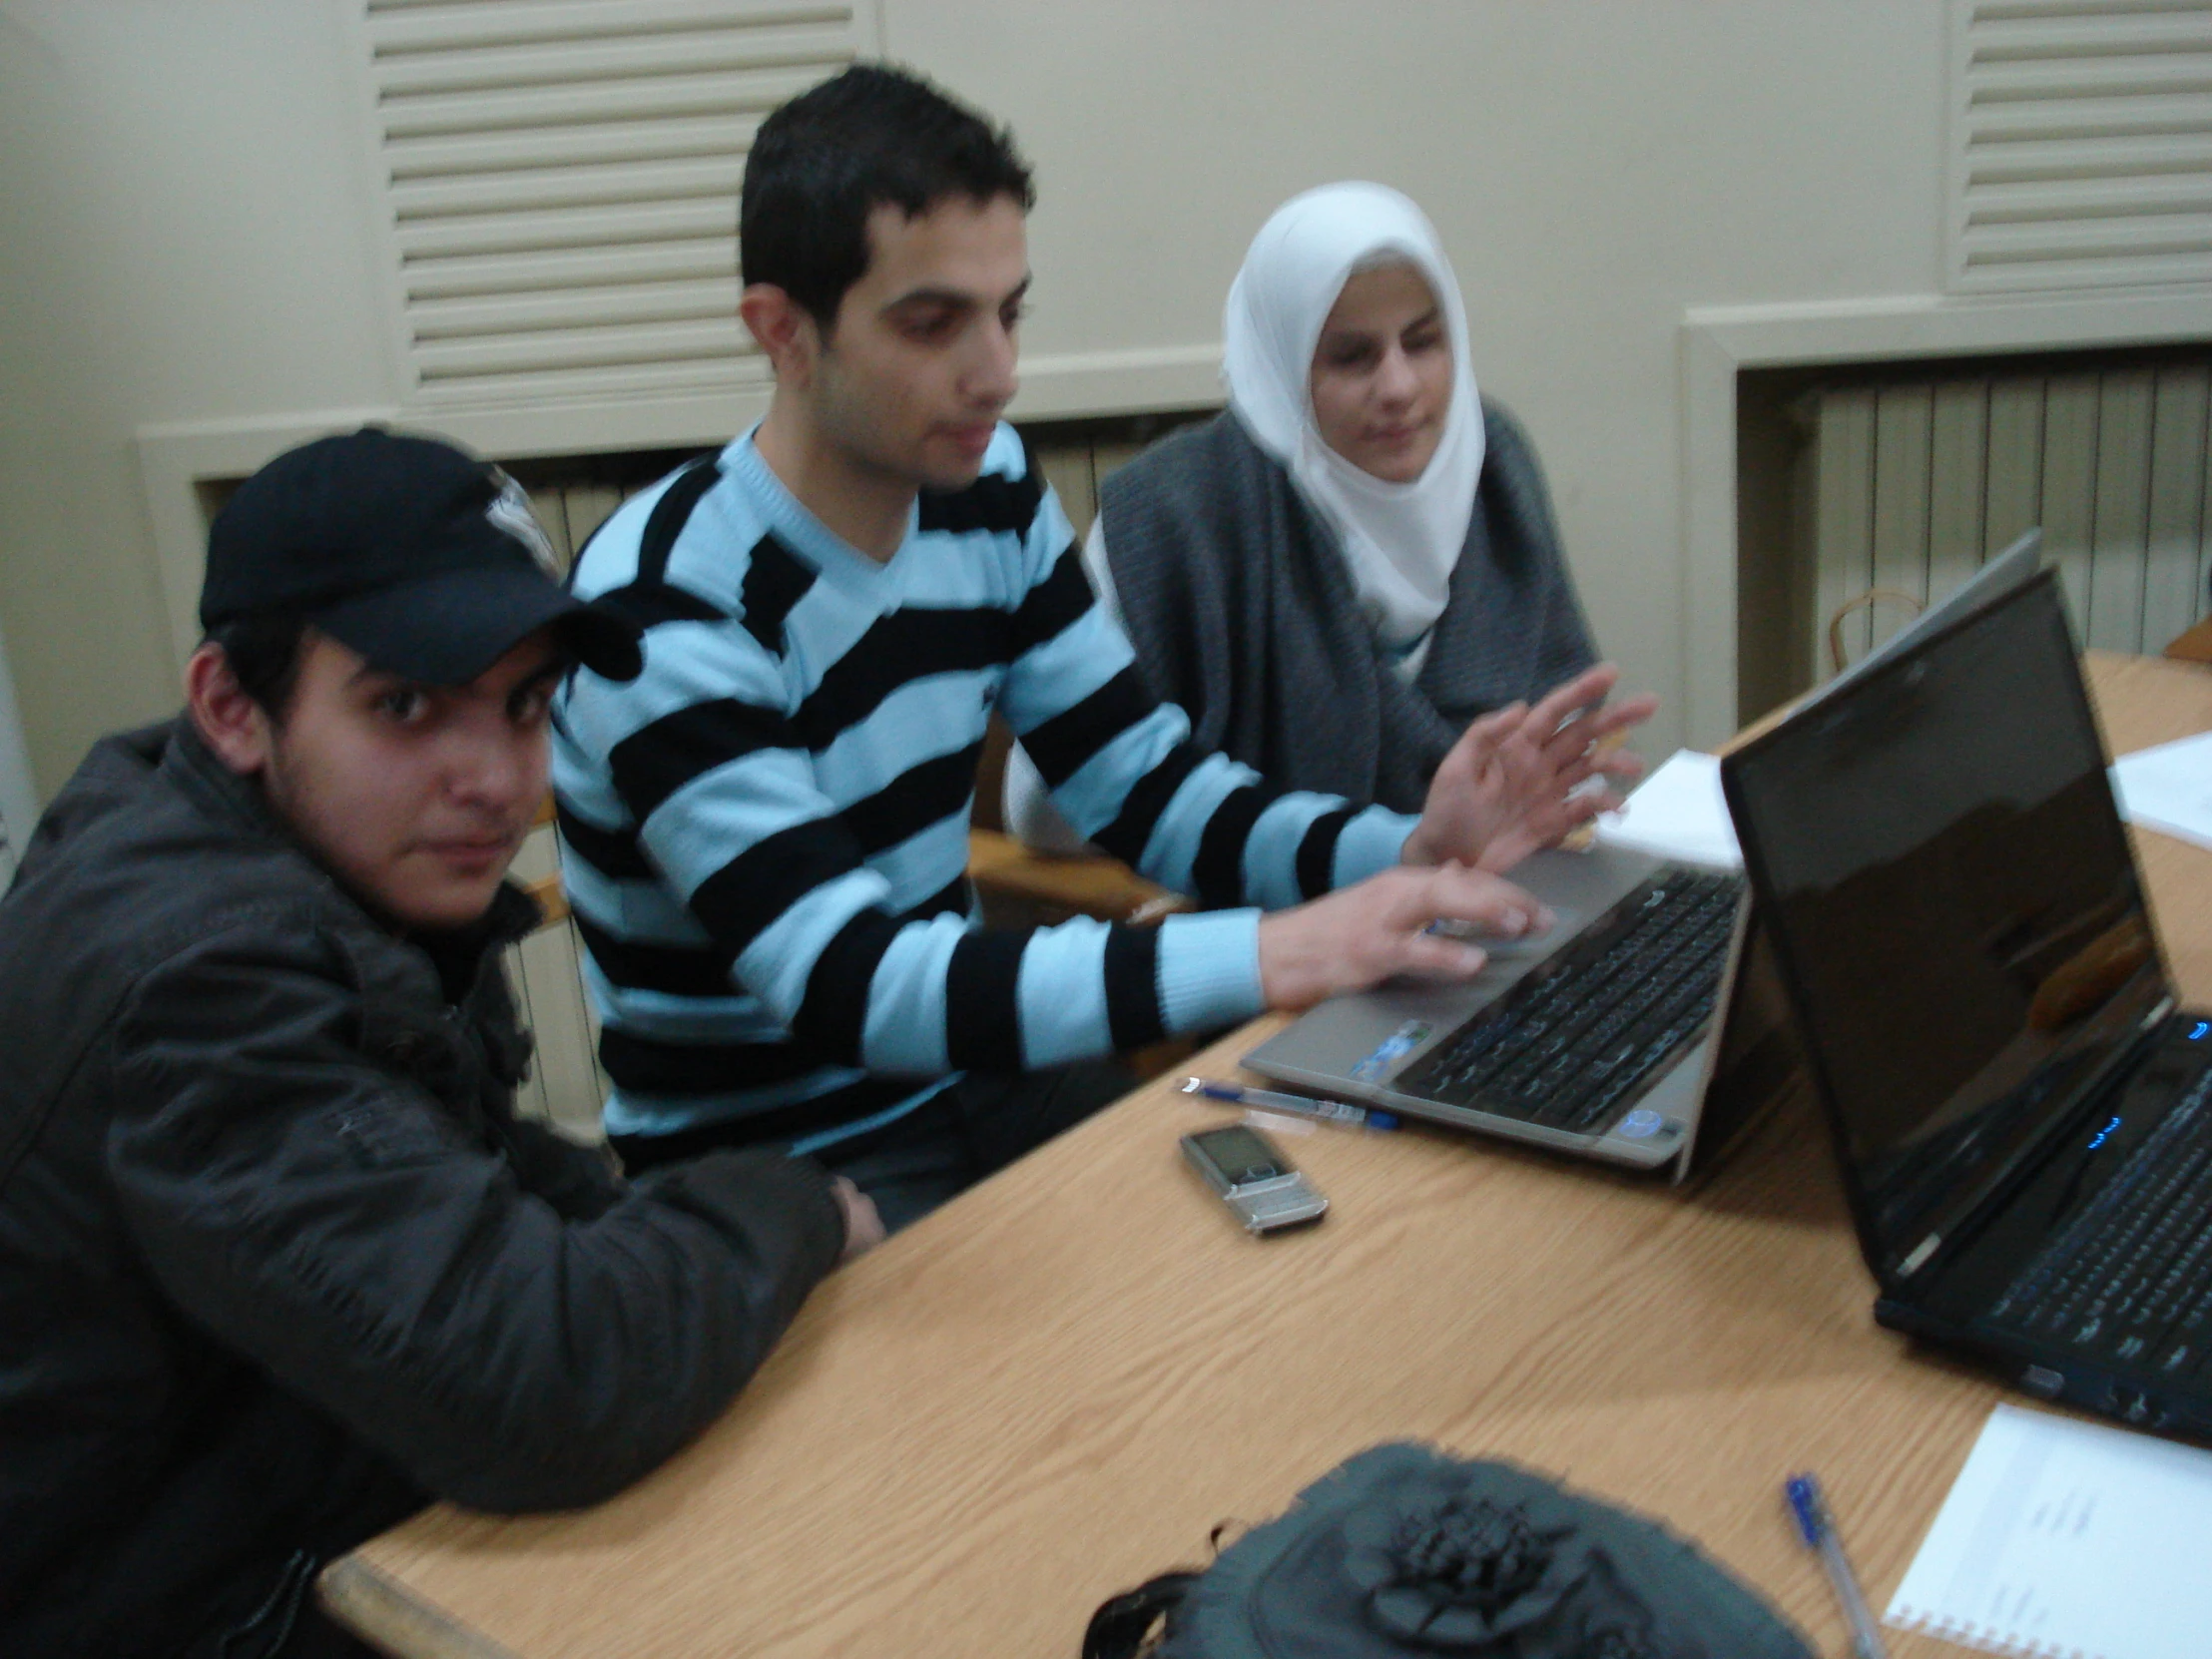 several people sitting around a table, working on laptops